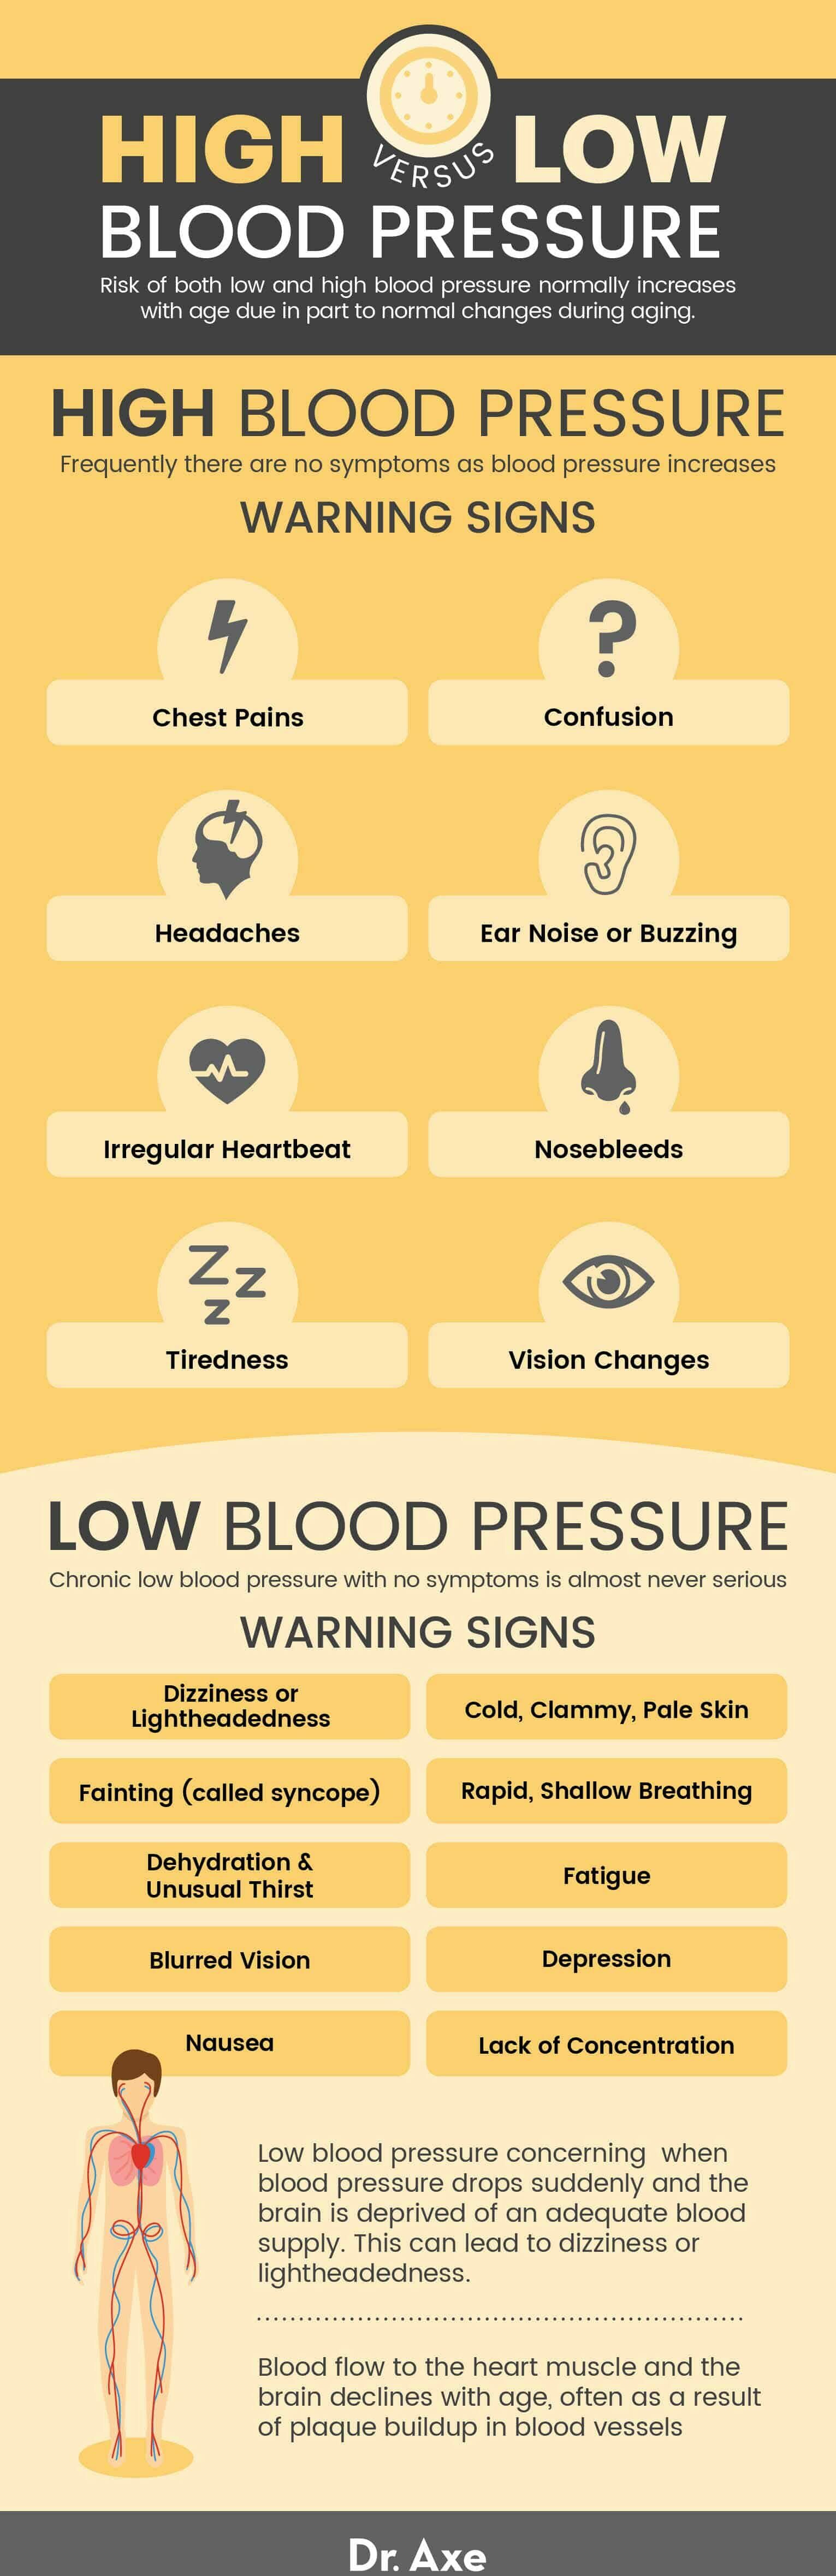 High blood pressure vs. low blood pressure - Dr. Axe